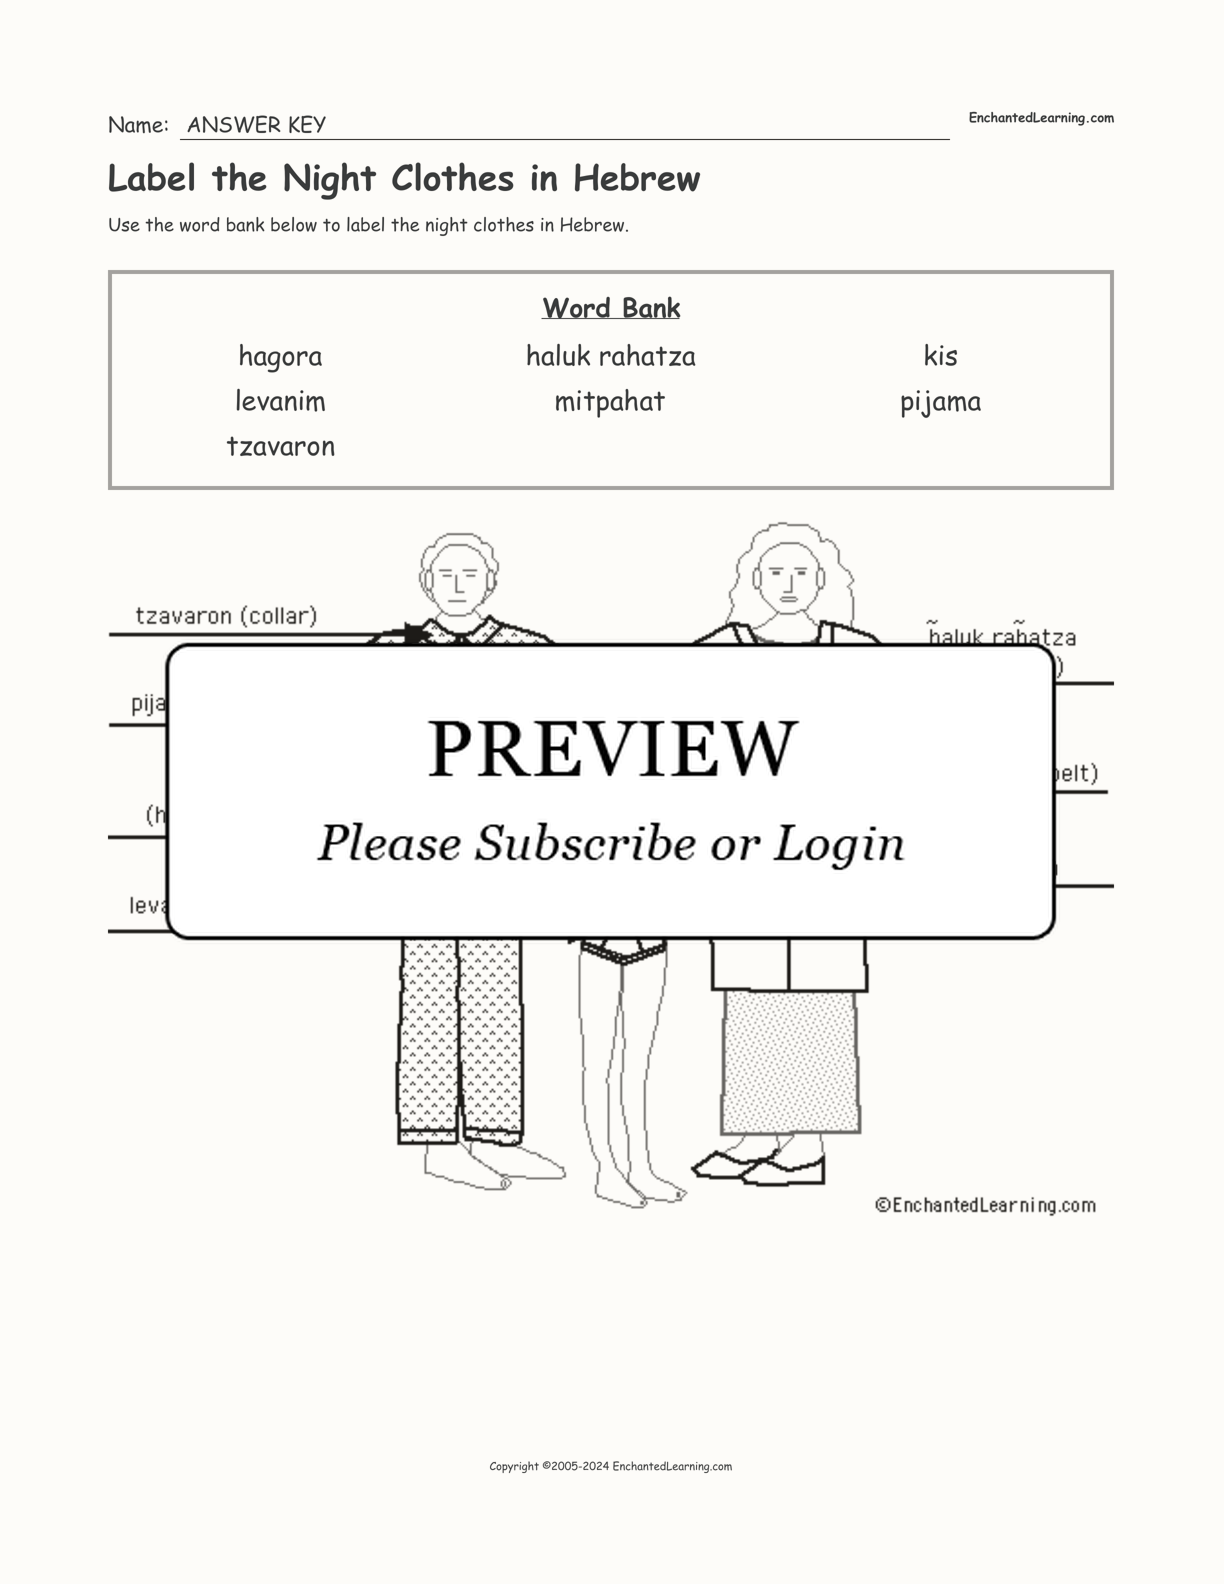 Label the Night Clothes in Hebrew interactive worksheet page 2